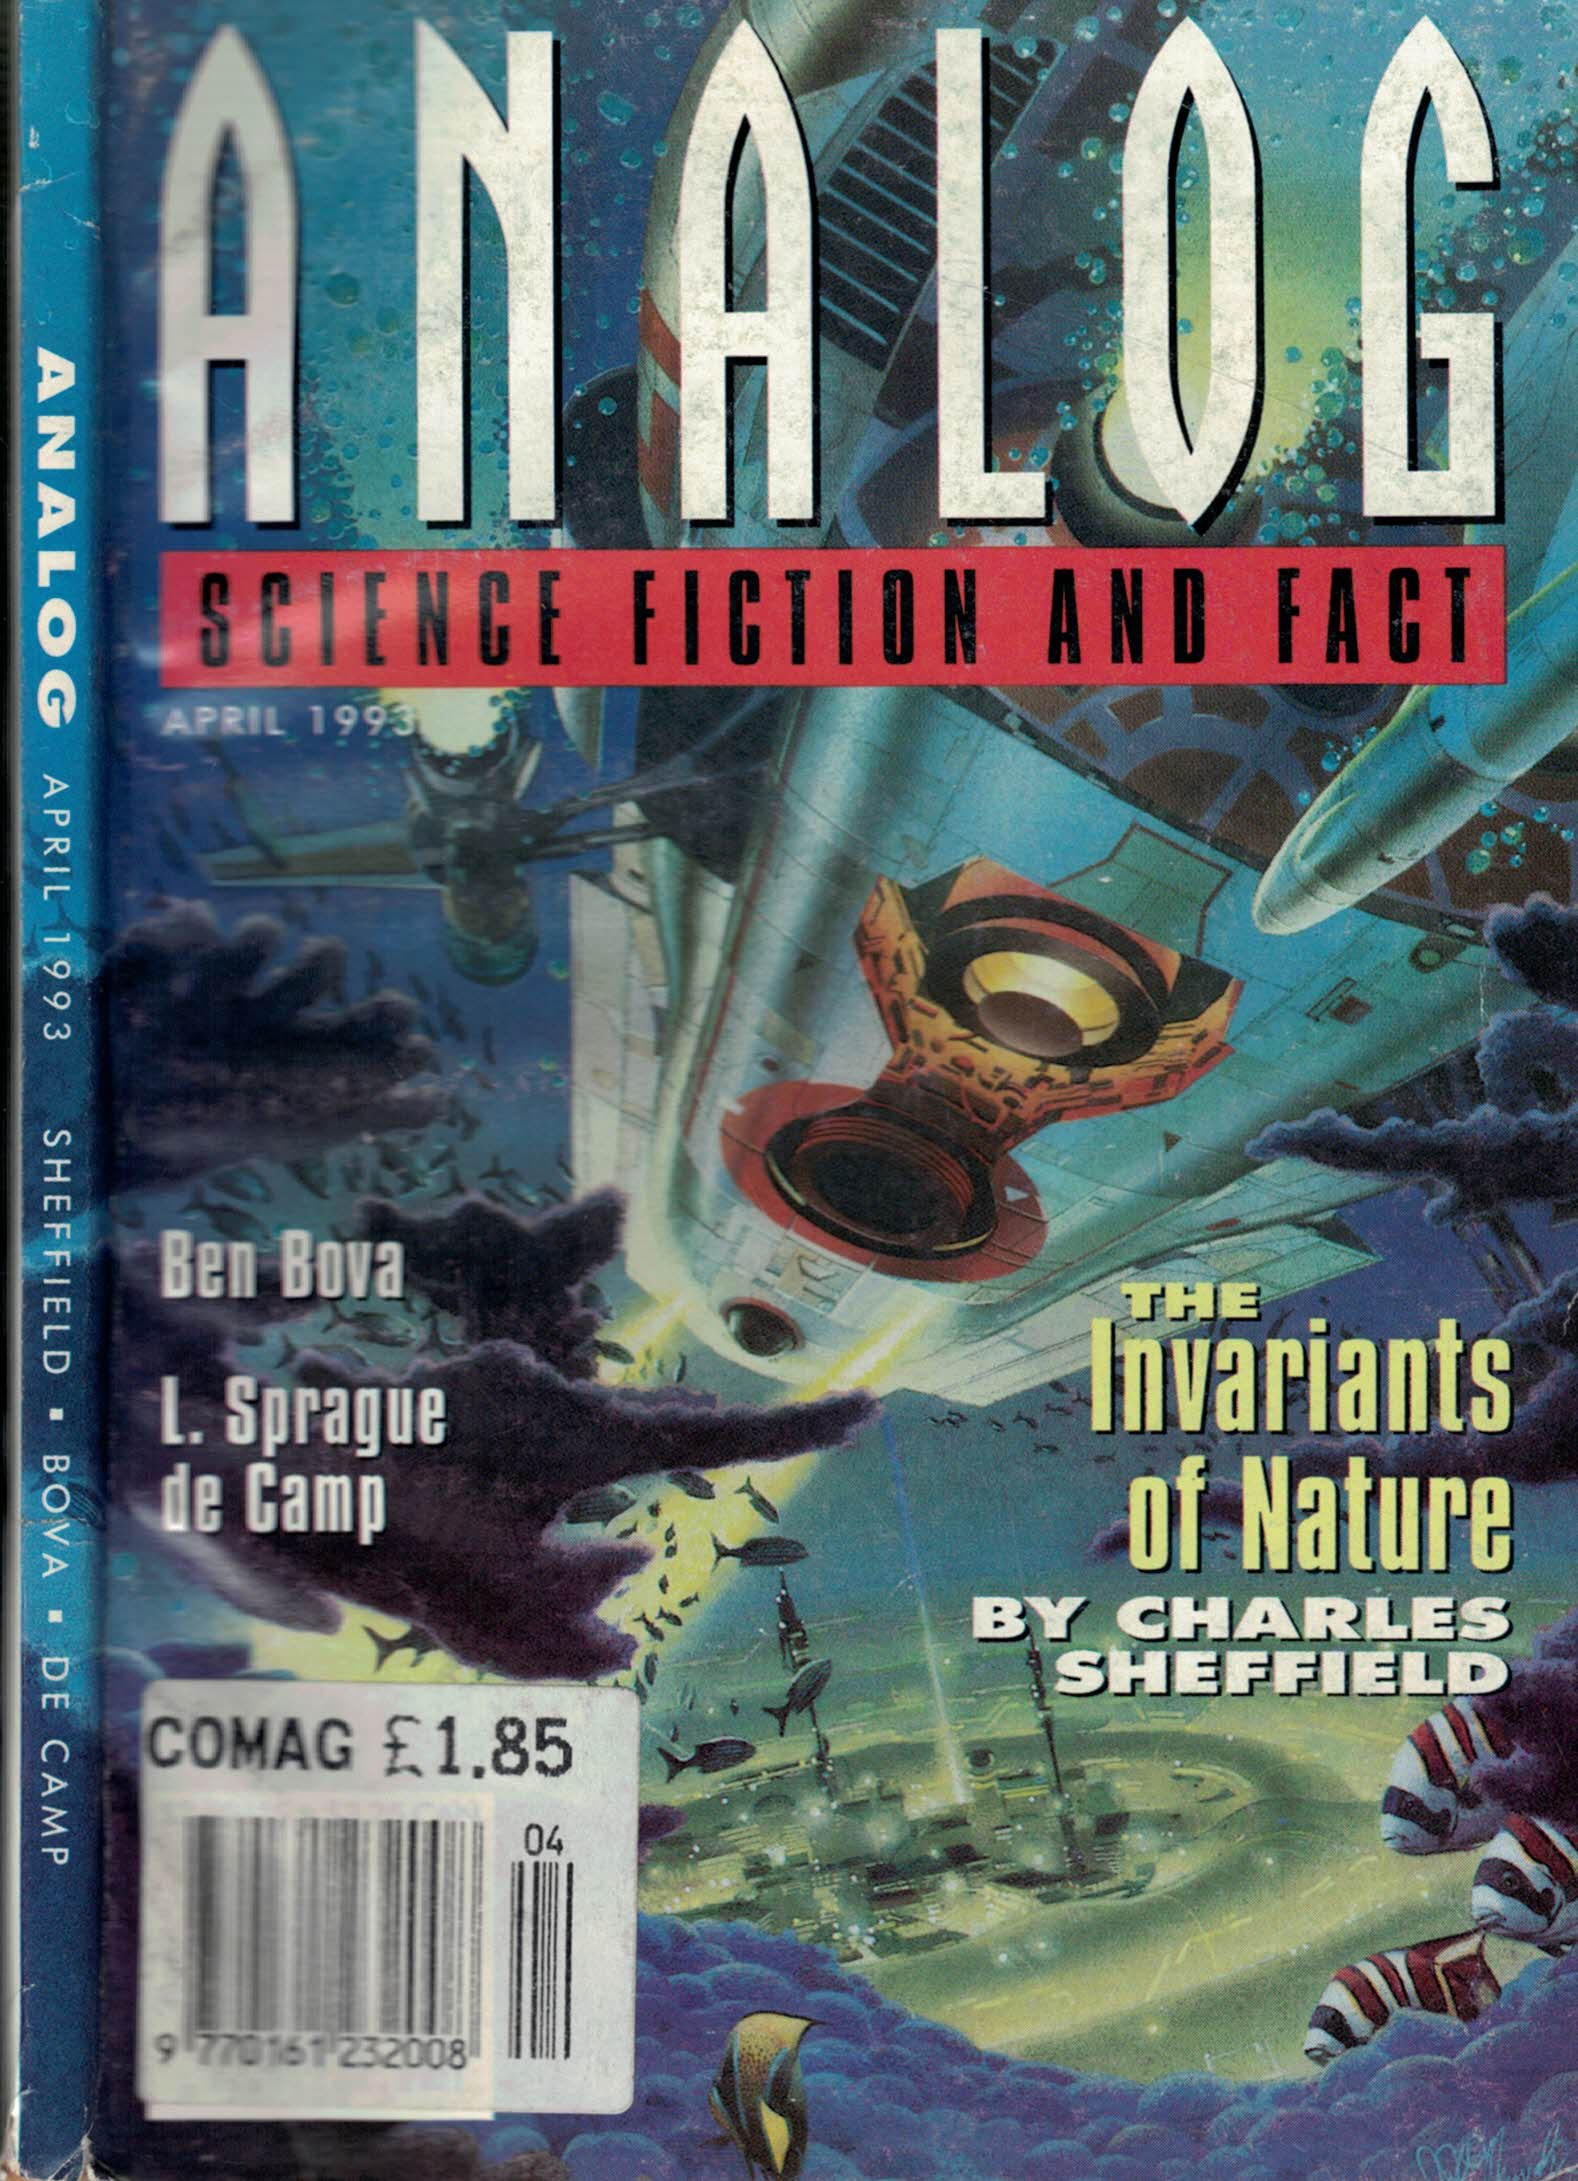 Analog. Science Fiction and Fact. Volume 113, Number 5. April 1993.